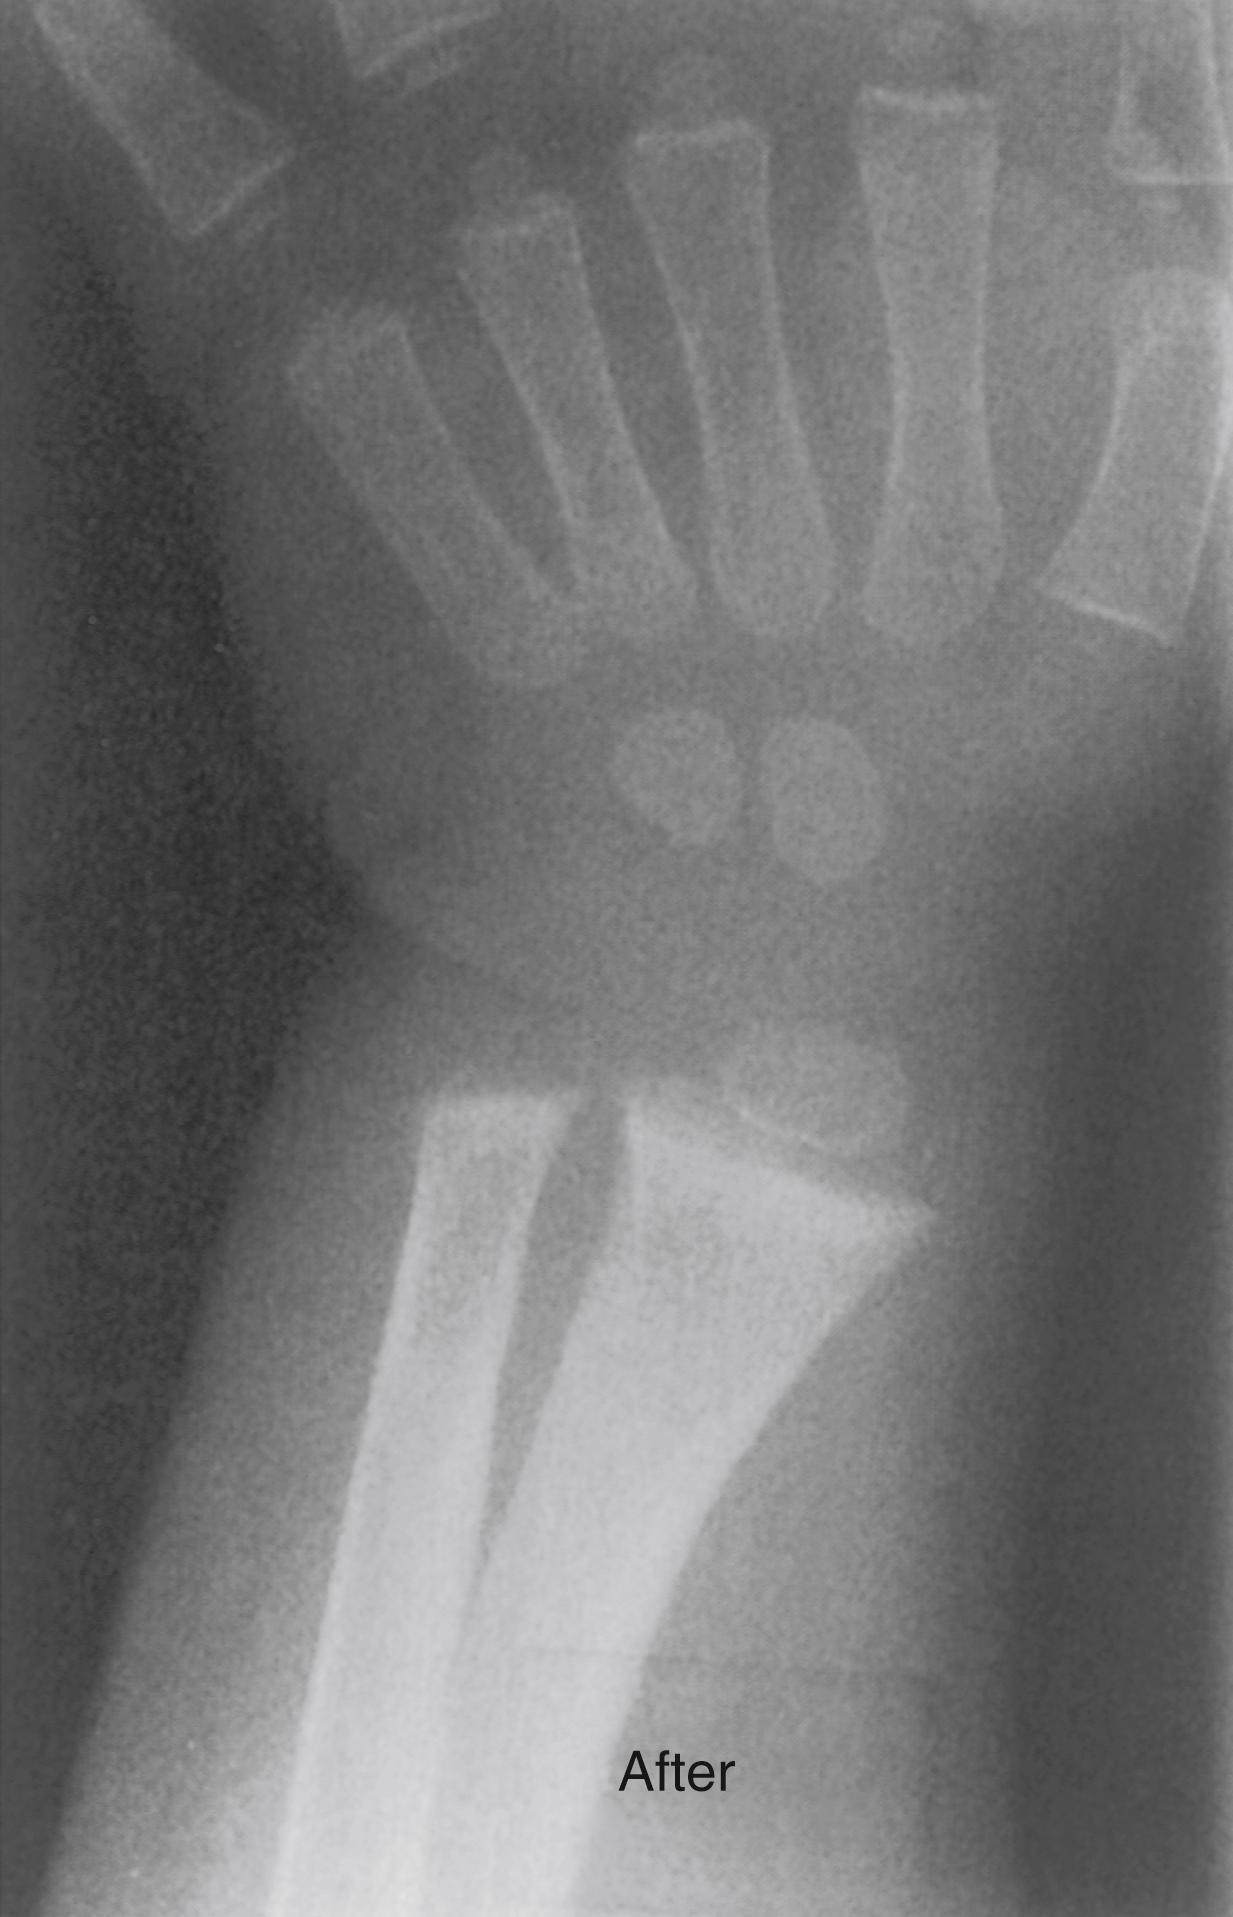 FIG. 38.5, Radiographic appearance of the wrist of the girl whose radiographs (rickets) appear in Fig. 38.3 after 4 months of treatment with vitamin D. The osteopenia has resolved and the physis is narrowed.